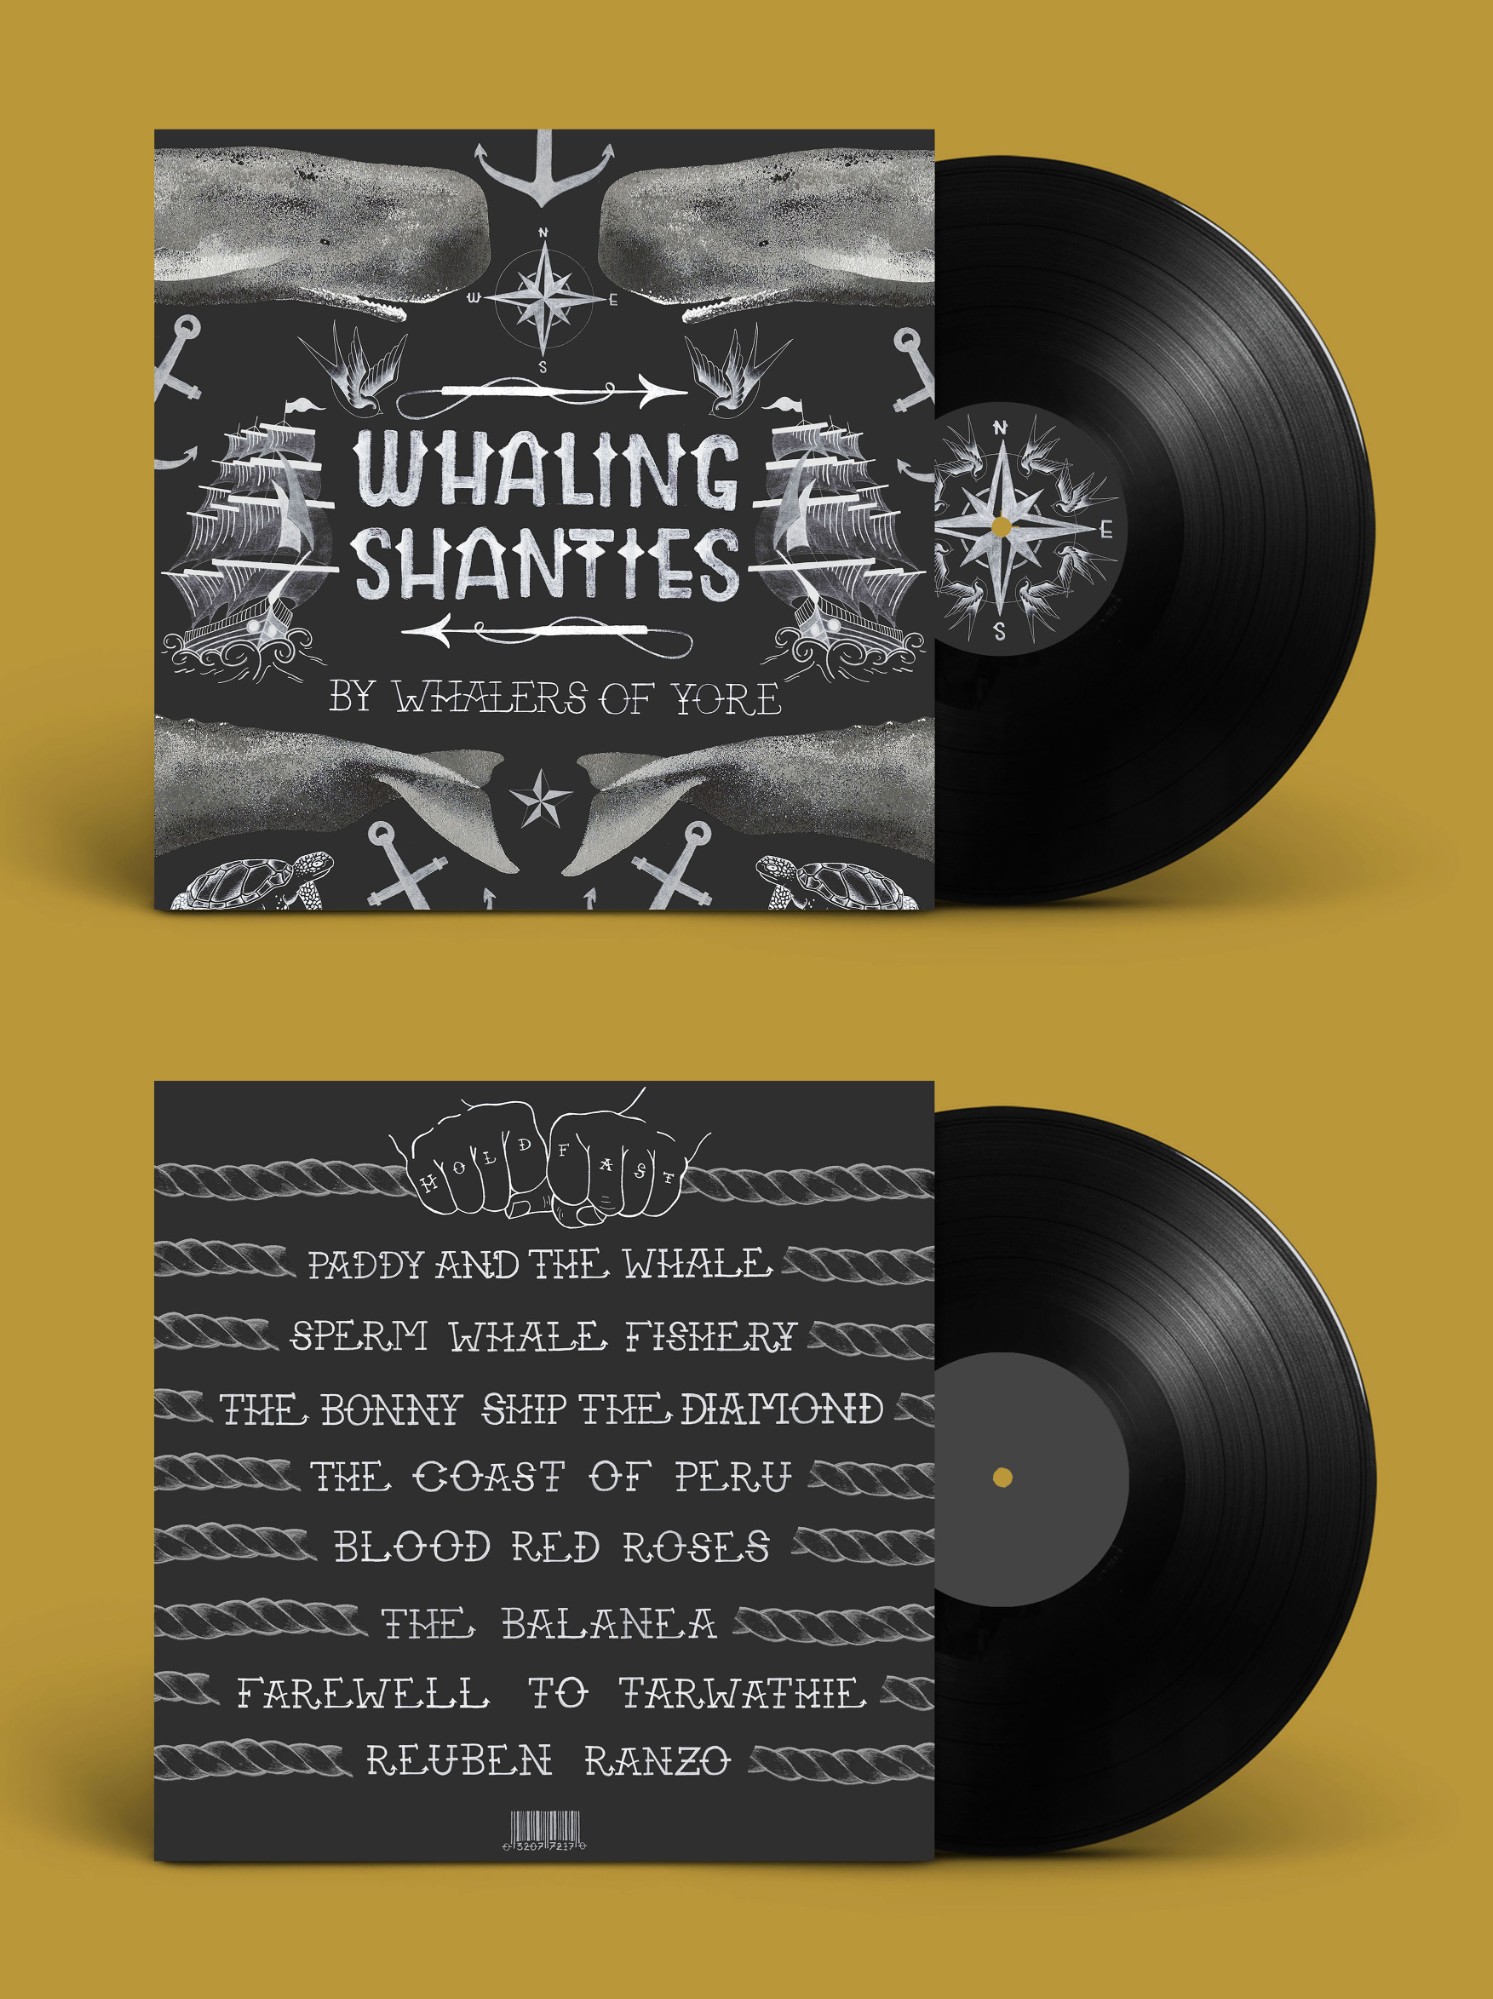 An album cover design for a speculative album featuring popular whaling shanties during the peak of whaling in the 1800’s.